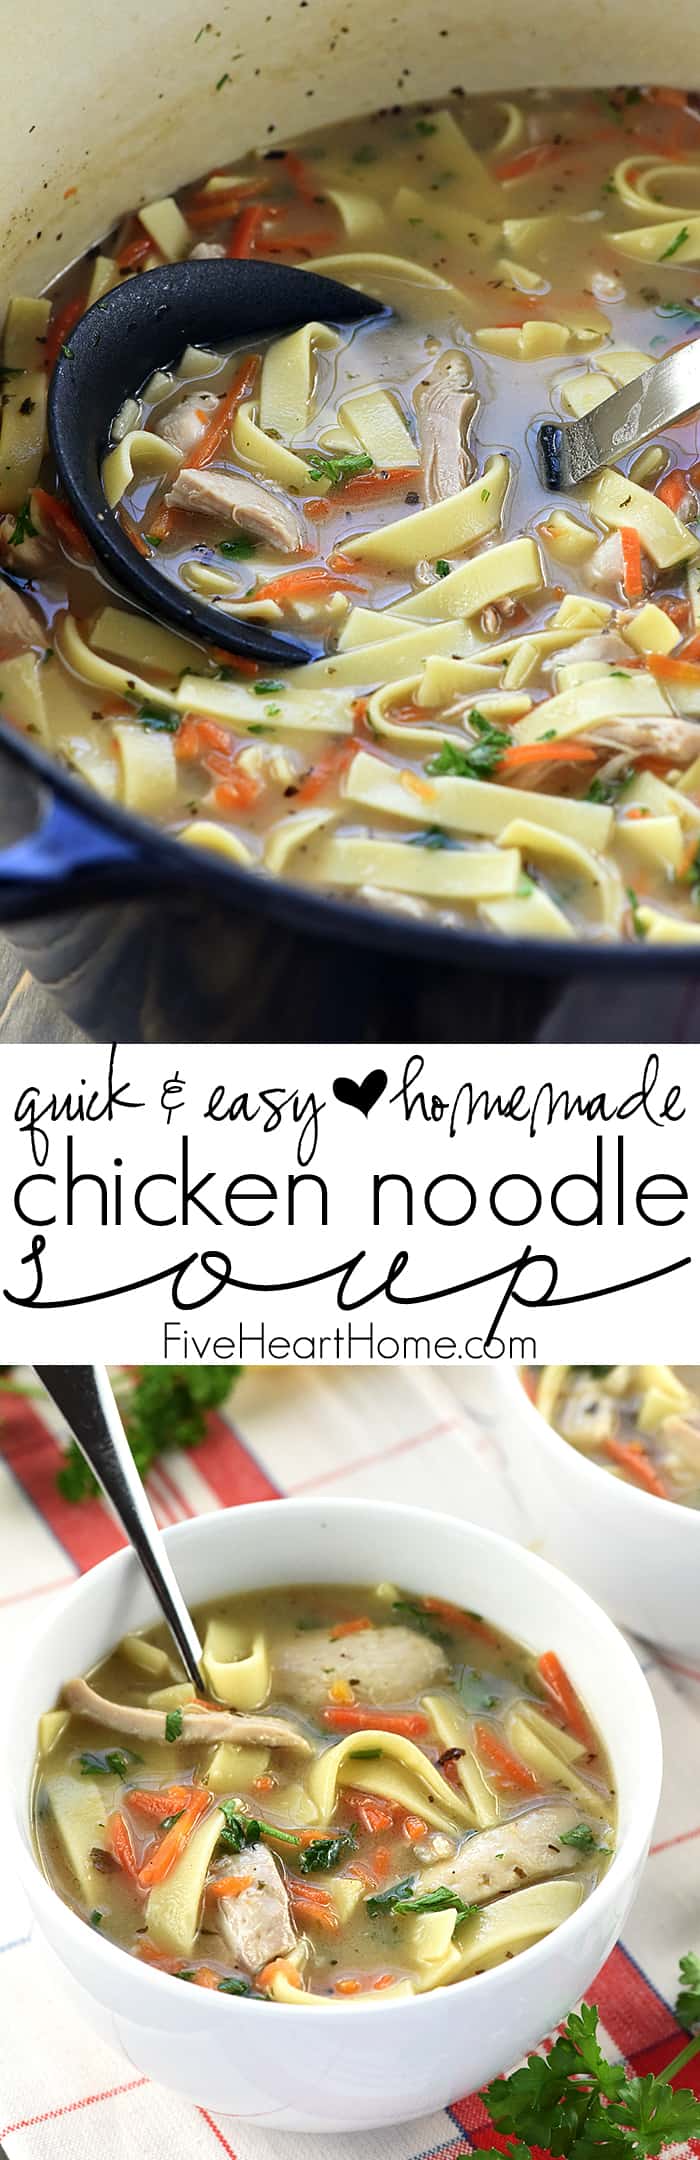 Quick & Easy Homemade Chicken Noodle Soup ~ a delicious, nourishing, cold-buster recipe for getting well soon! | FiveHeartHome.com via @fivehearthome